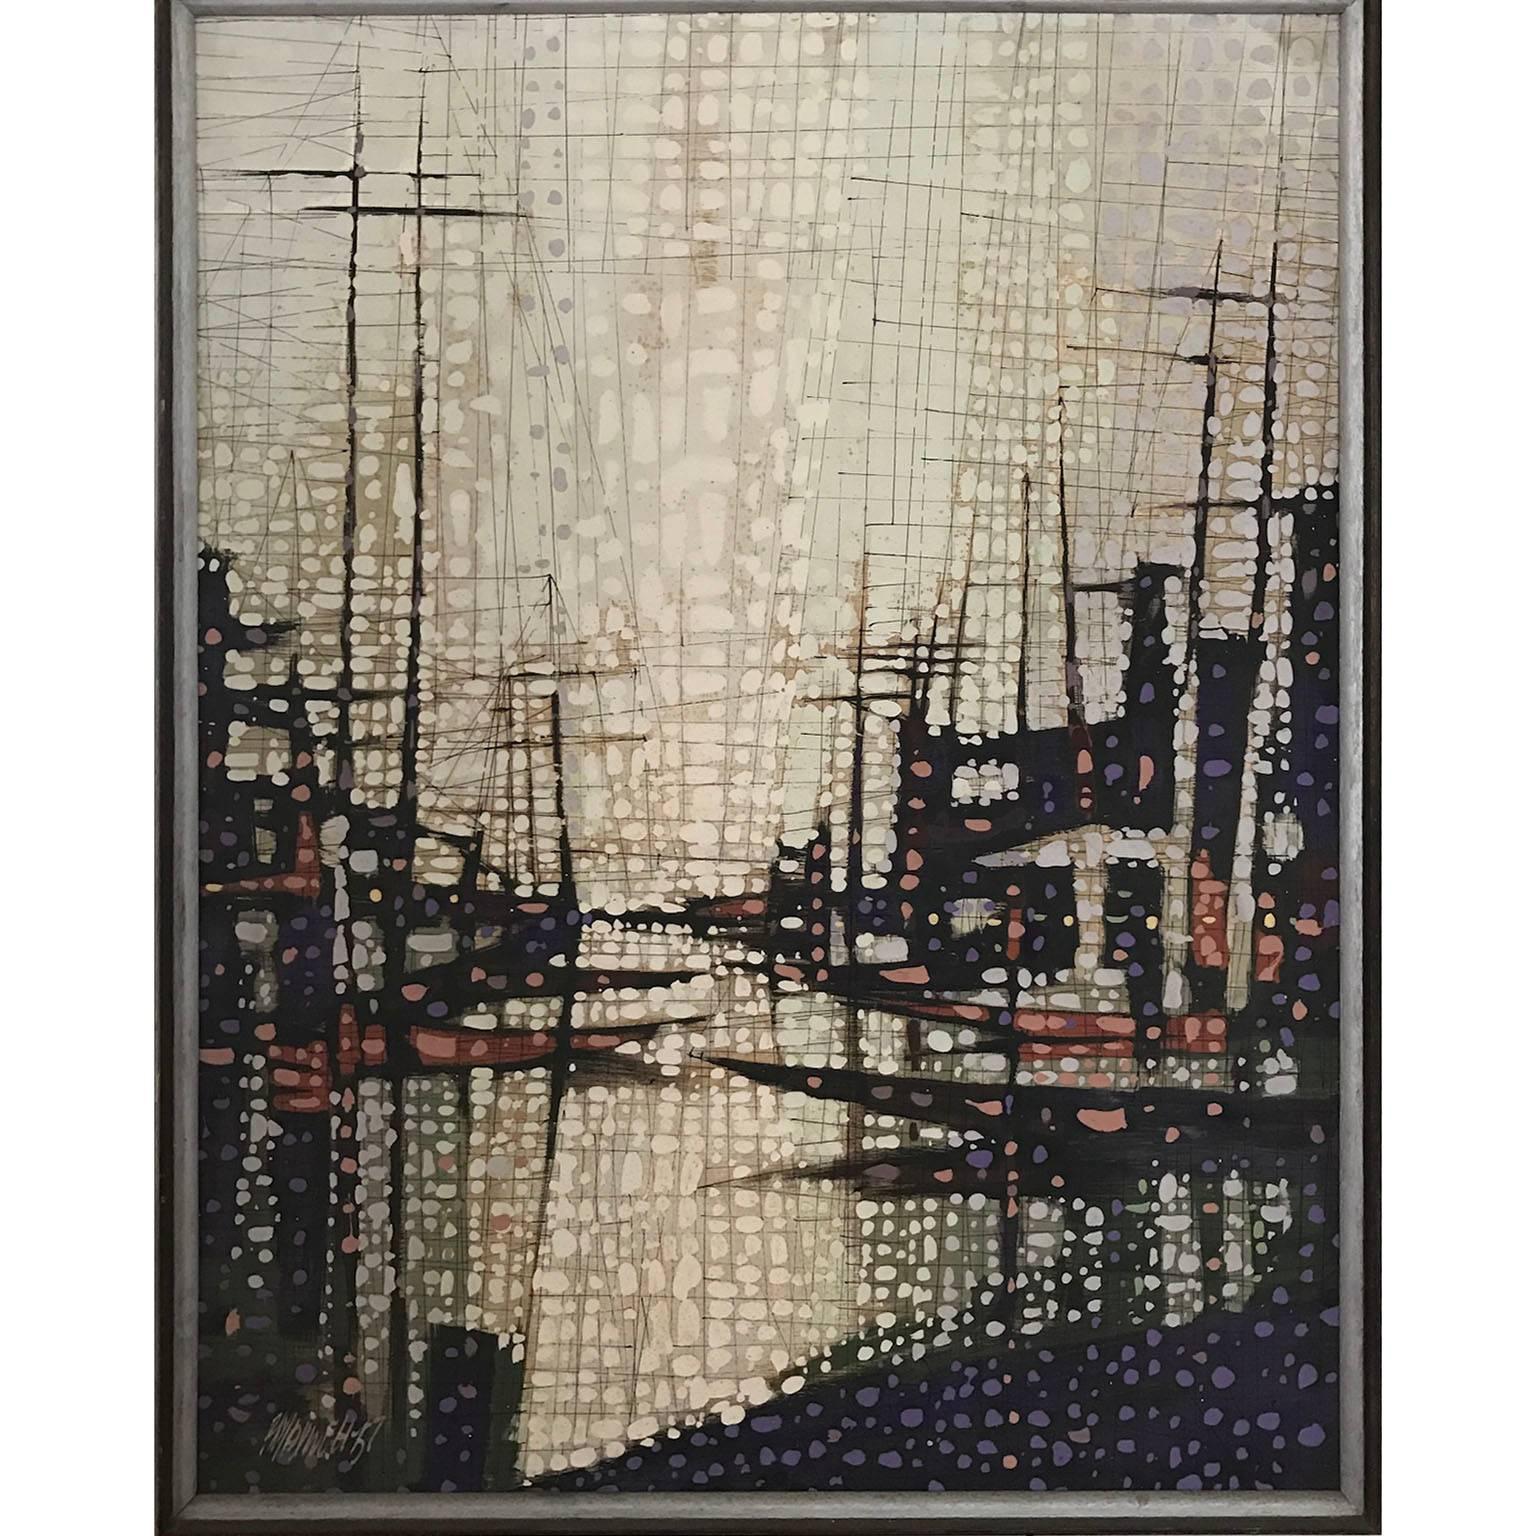 Paul Maxwell Landscape Painting - Faux-Pointillism Abstract Sailboats Seascape 